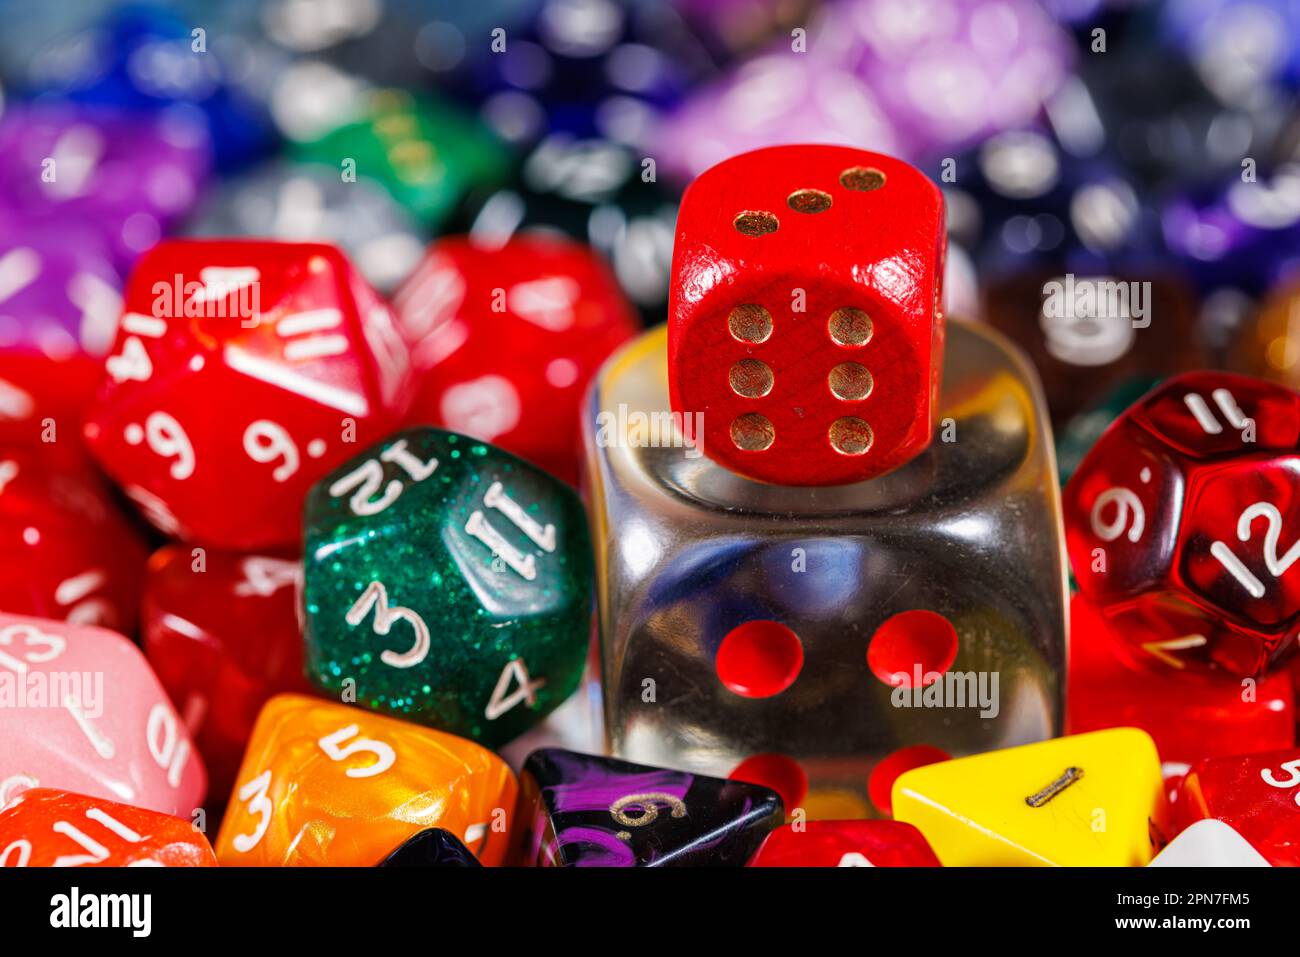 Dice for board game and role-playing game Stock Photo